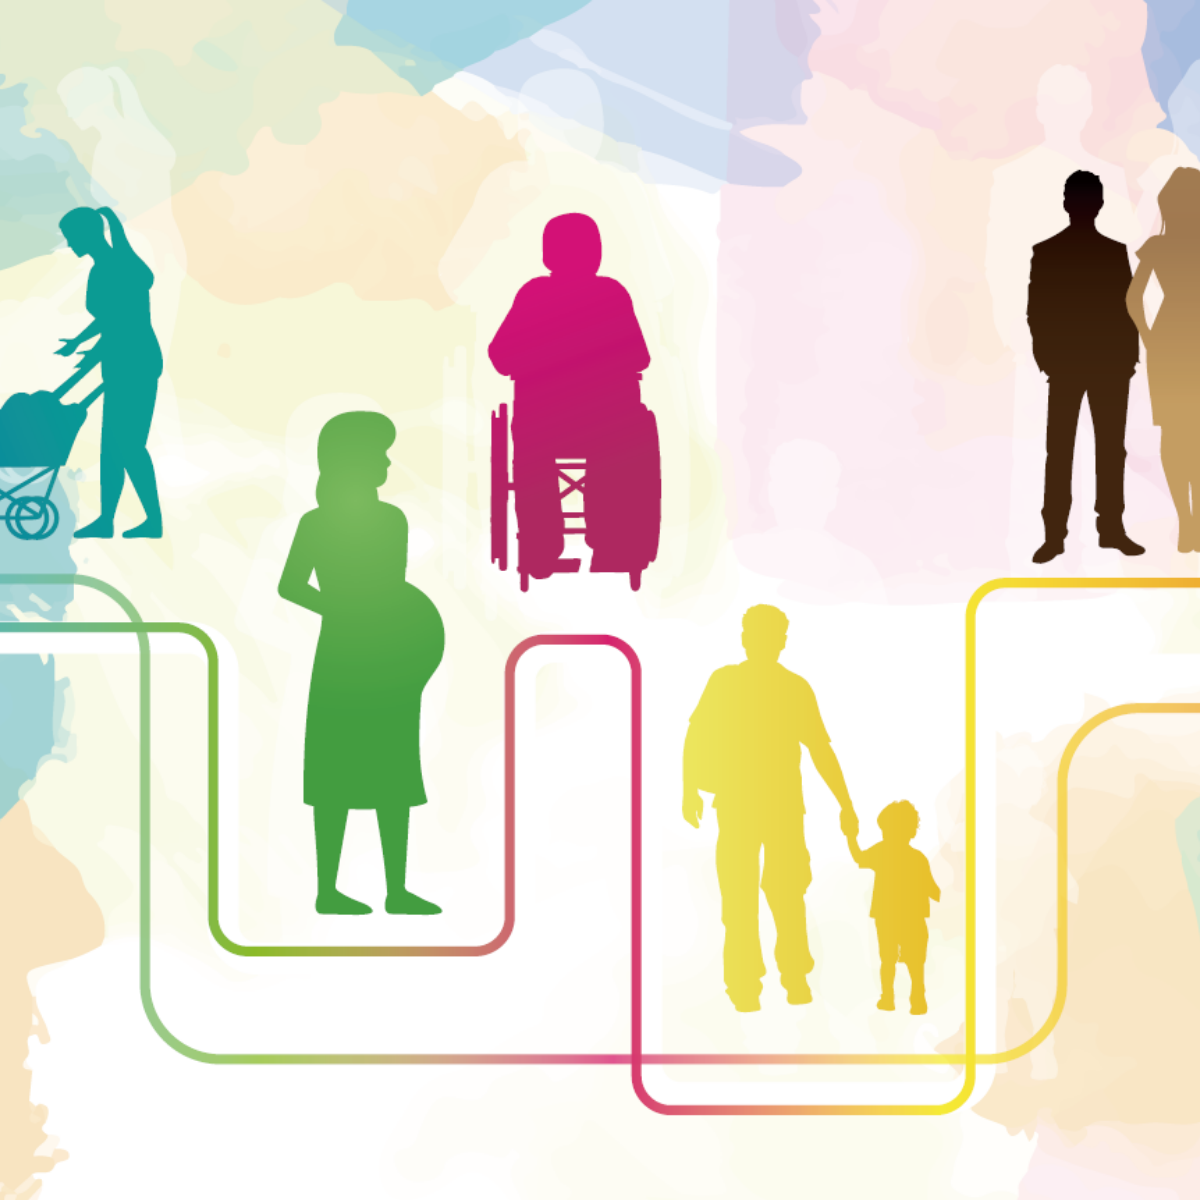 Illustrated image of people with disabilities, people with family status, and people of different races